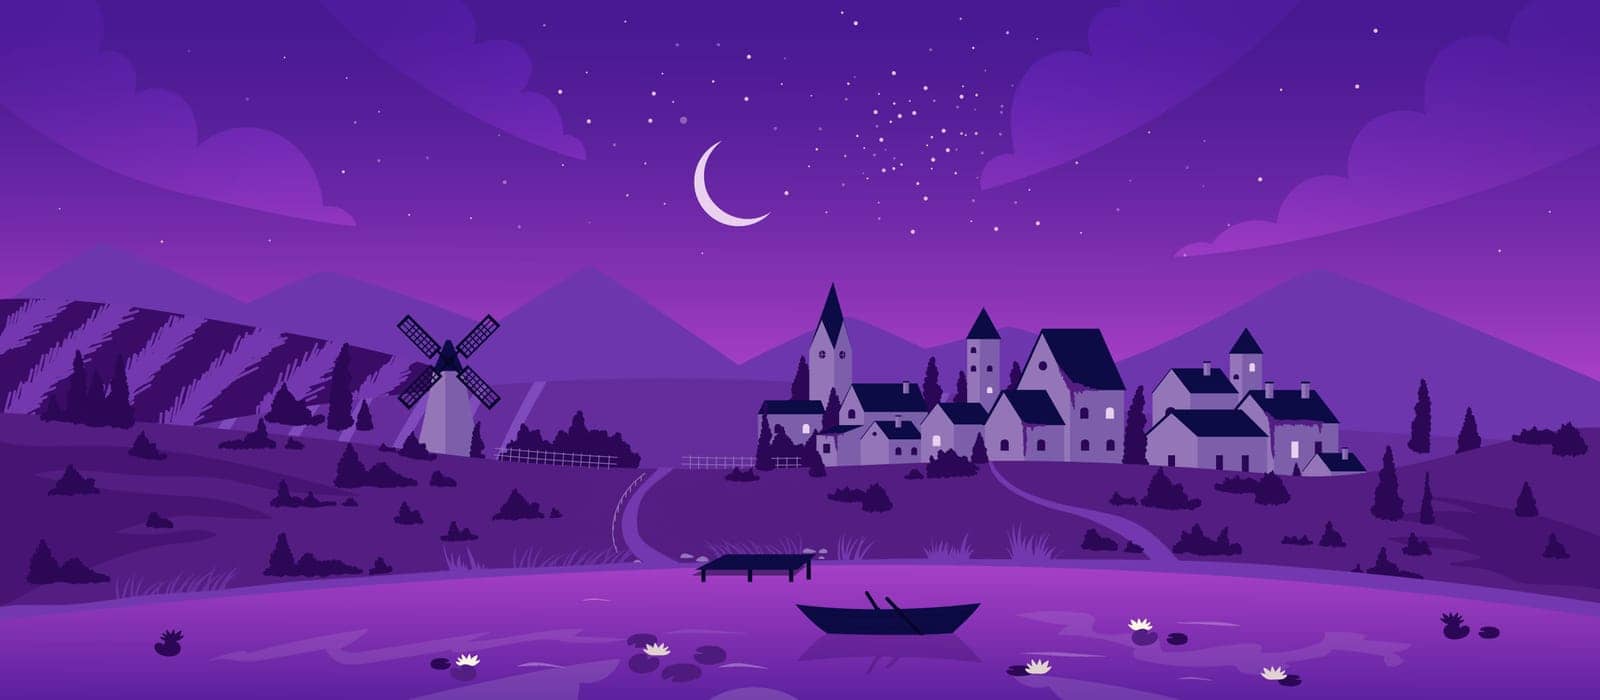 Night town or village by lake landscape, moon in purple starry sky, boat, farm houses by Popov